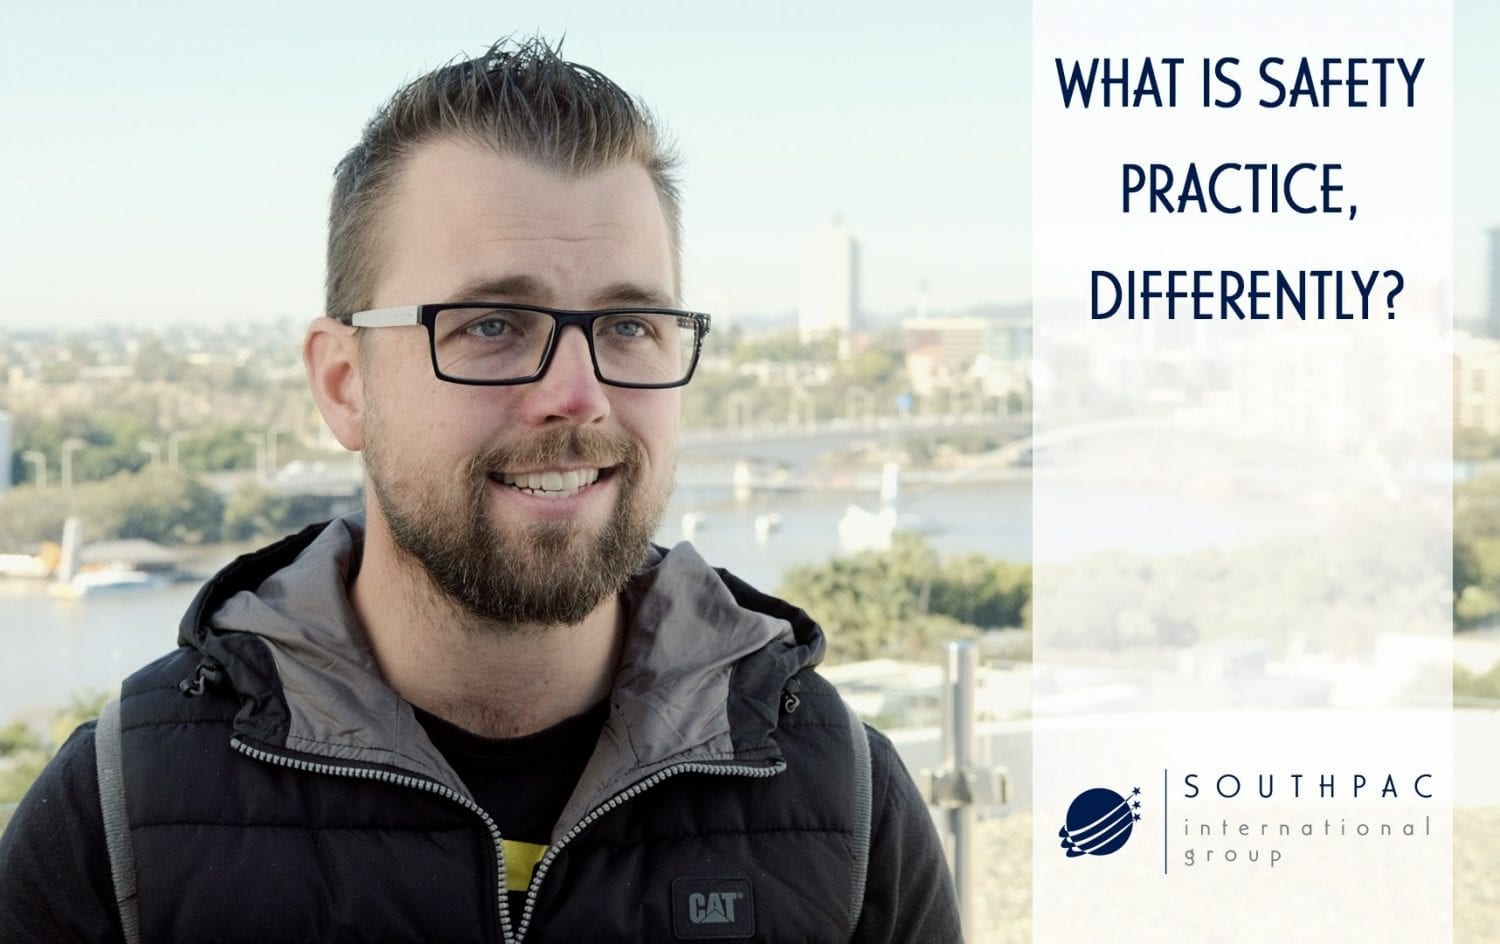 Andrew Barrett, a HOPLAB Collaborator, answers "What is safety practice differently?"